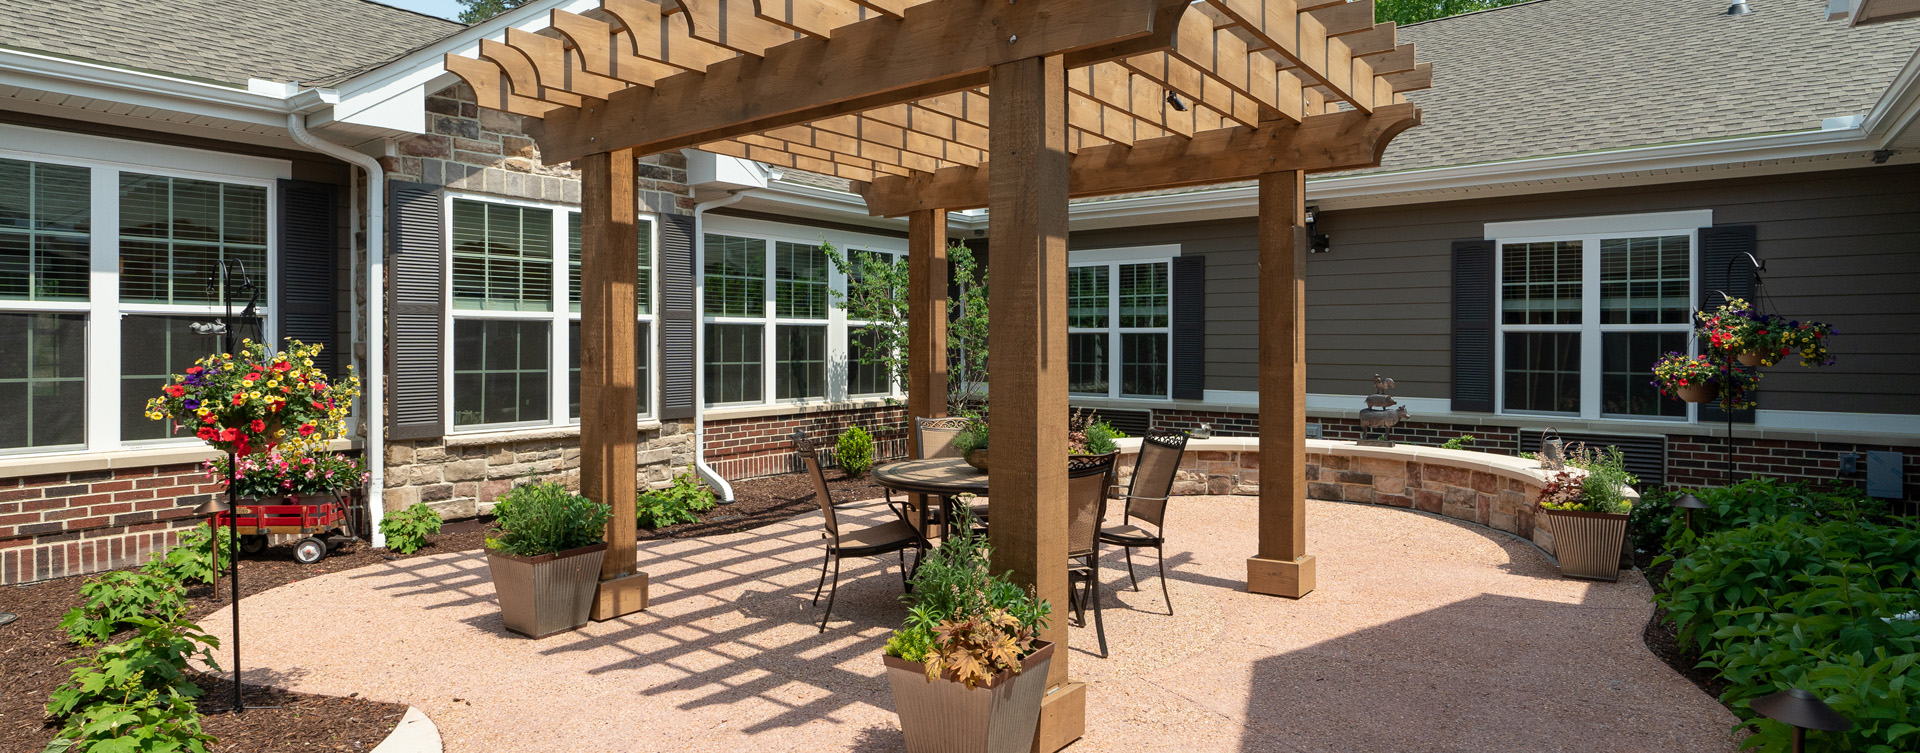 Residents with dementia can enjoy the outdoors by stepping into our secure courtyard at Bickford of Chesapeake